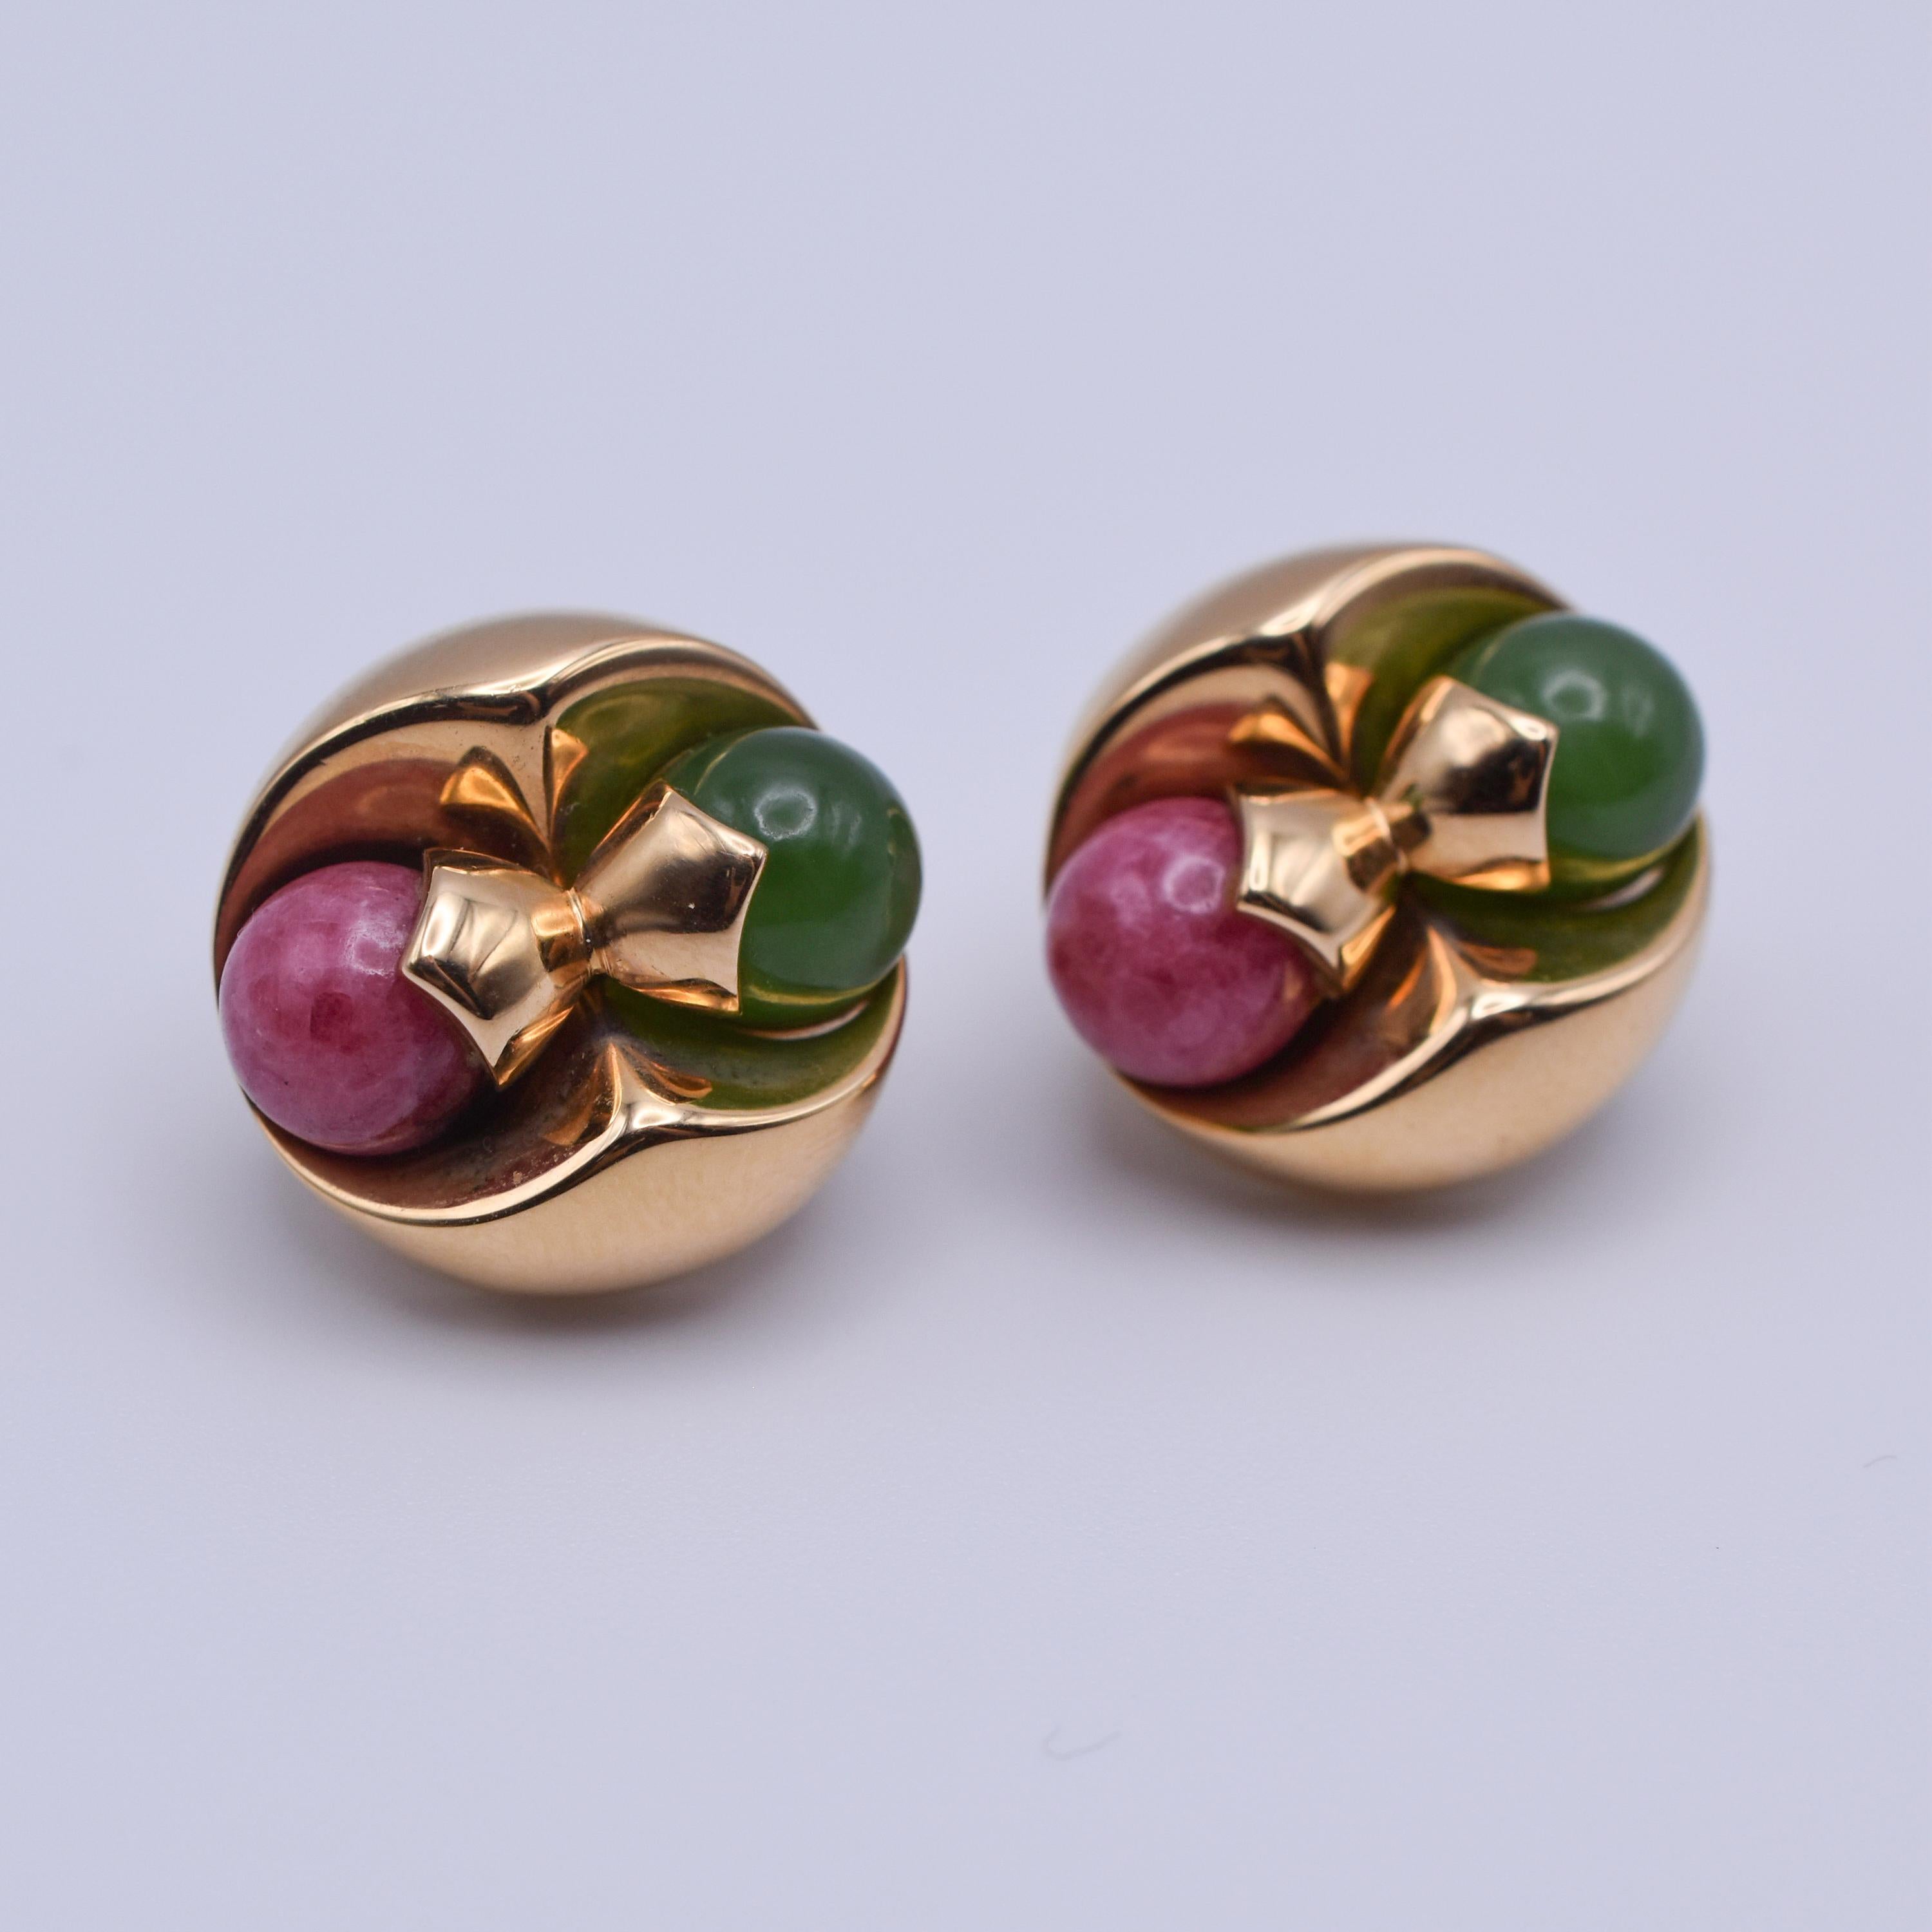 A Vintage pair of Bulgari Chrysophrase Gold Earclips, crafted in 18k gold. Made in Italy, circa 1980